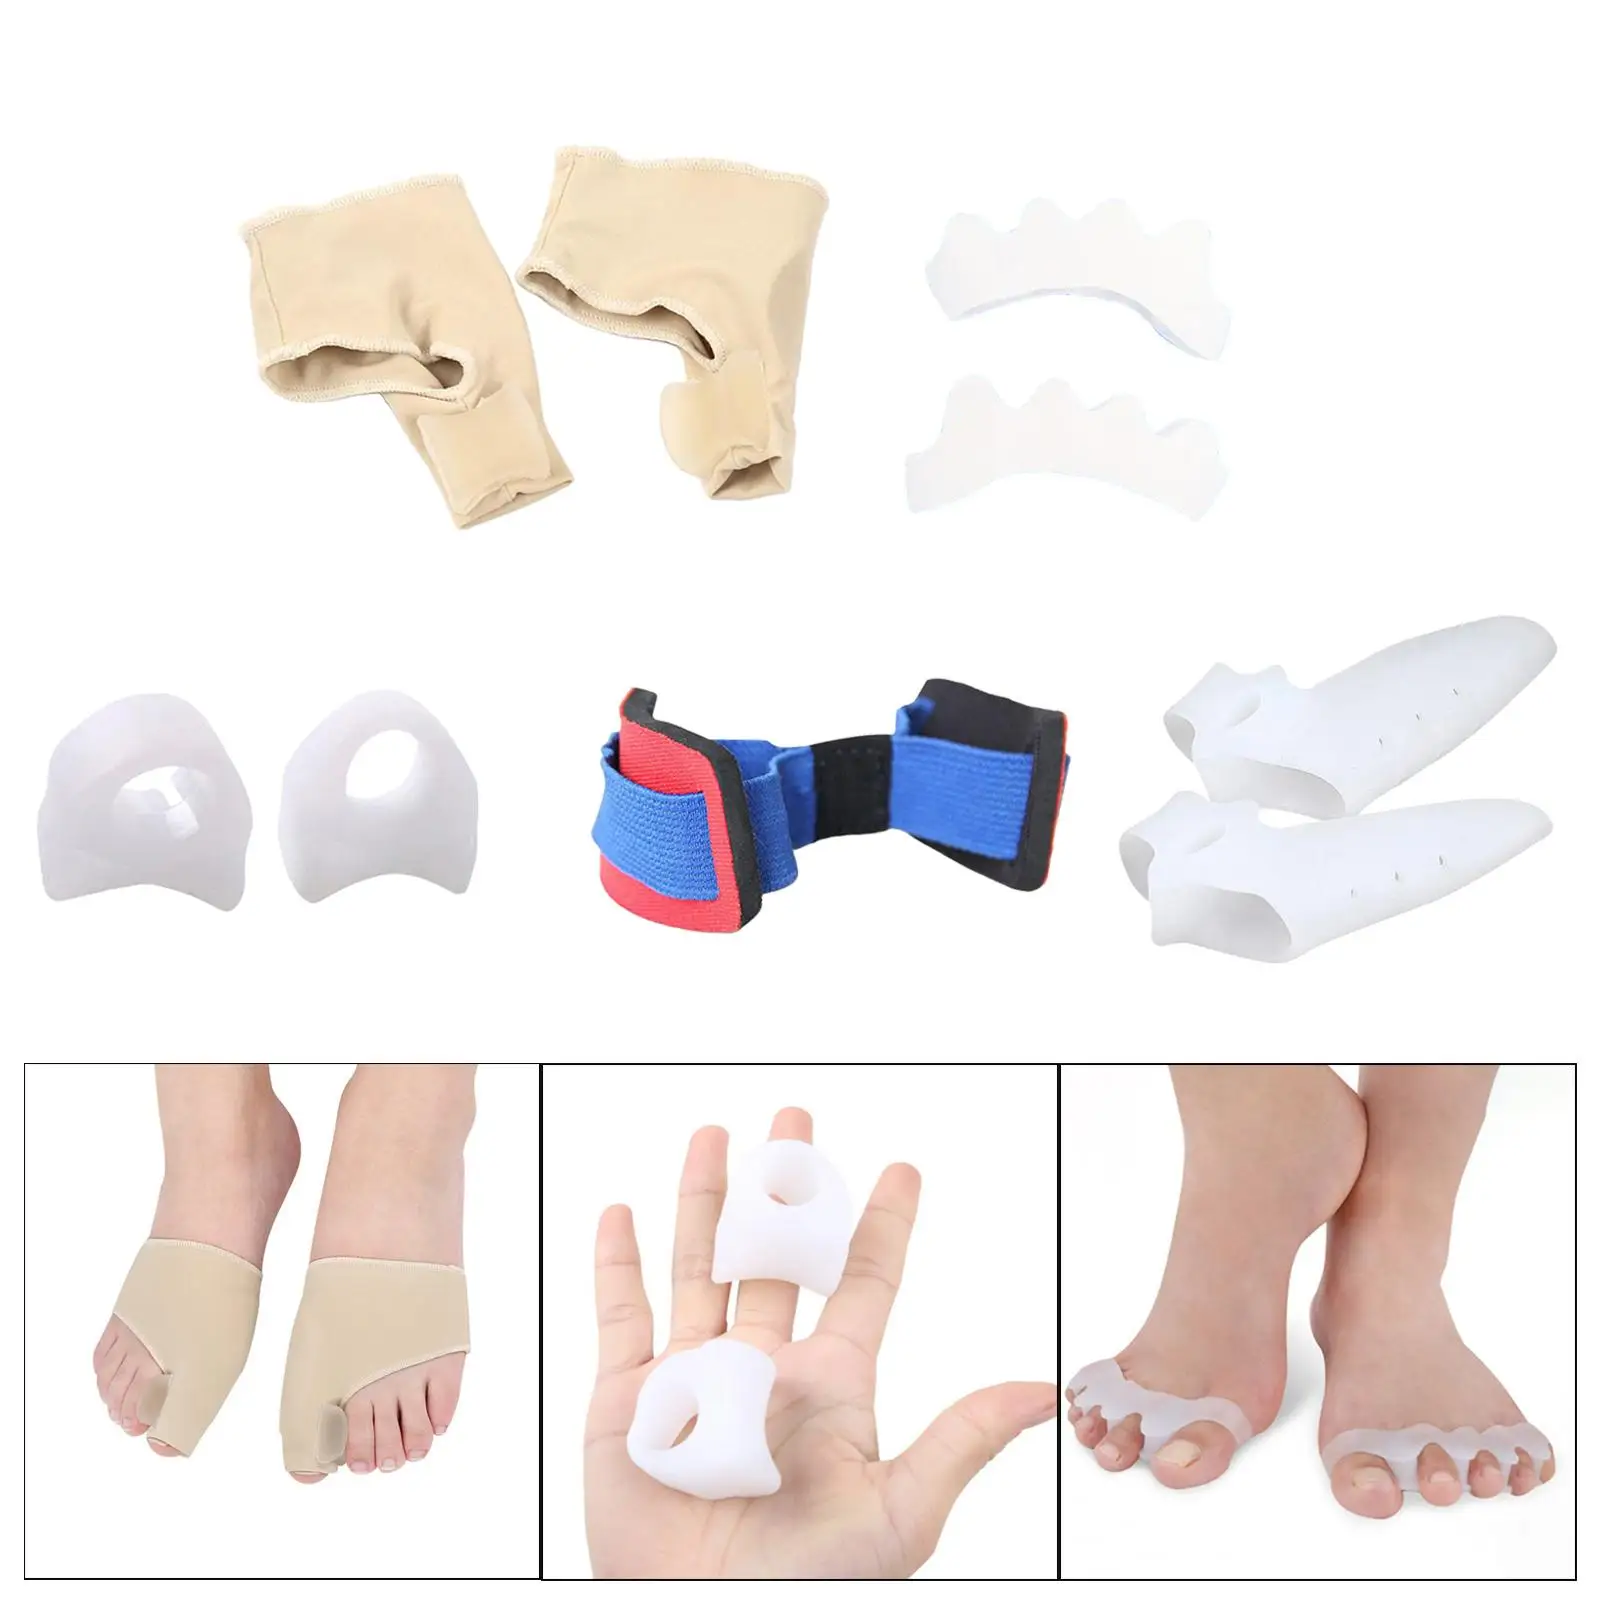 Set of 9 Bunion Corrector Bunion Relief Sleeves Kit, Toe Straightener Stretchy Toe Spreader